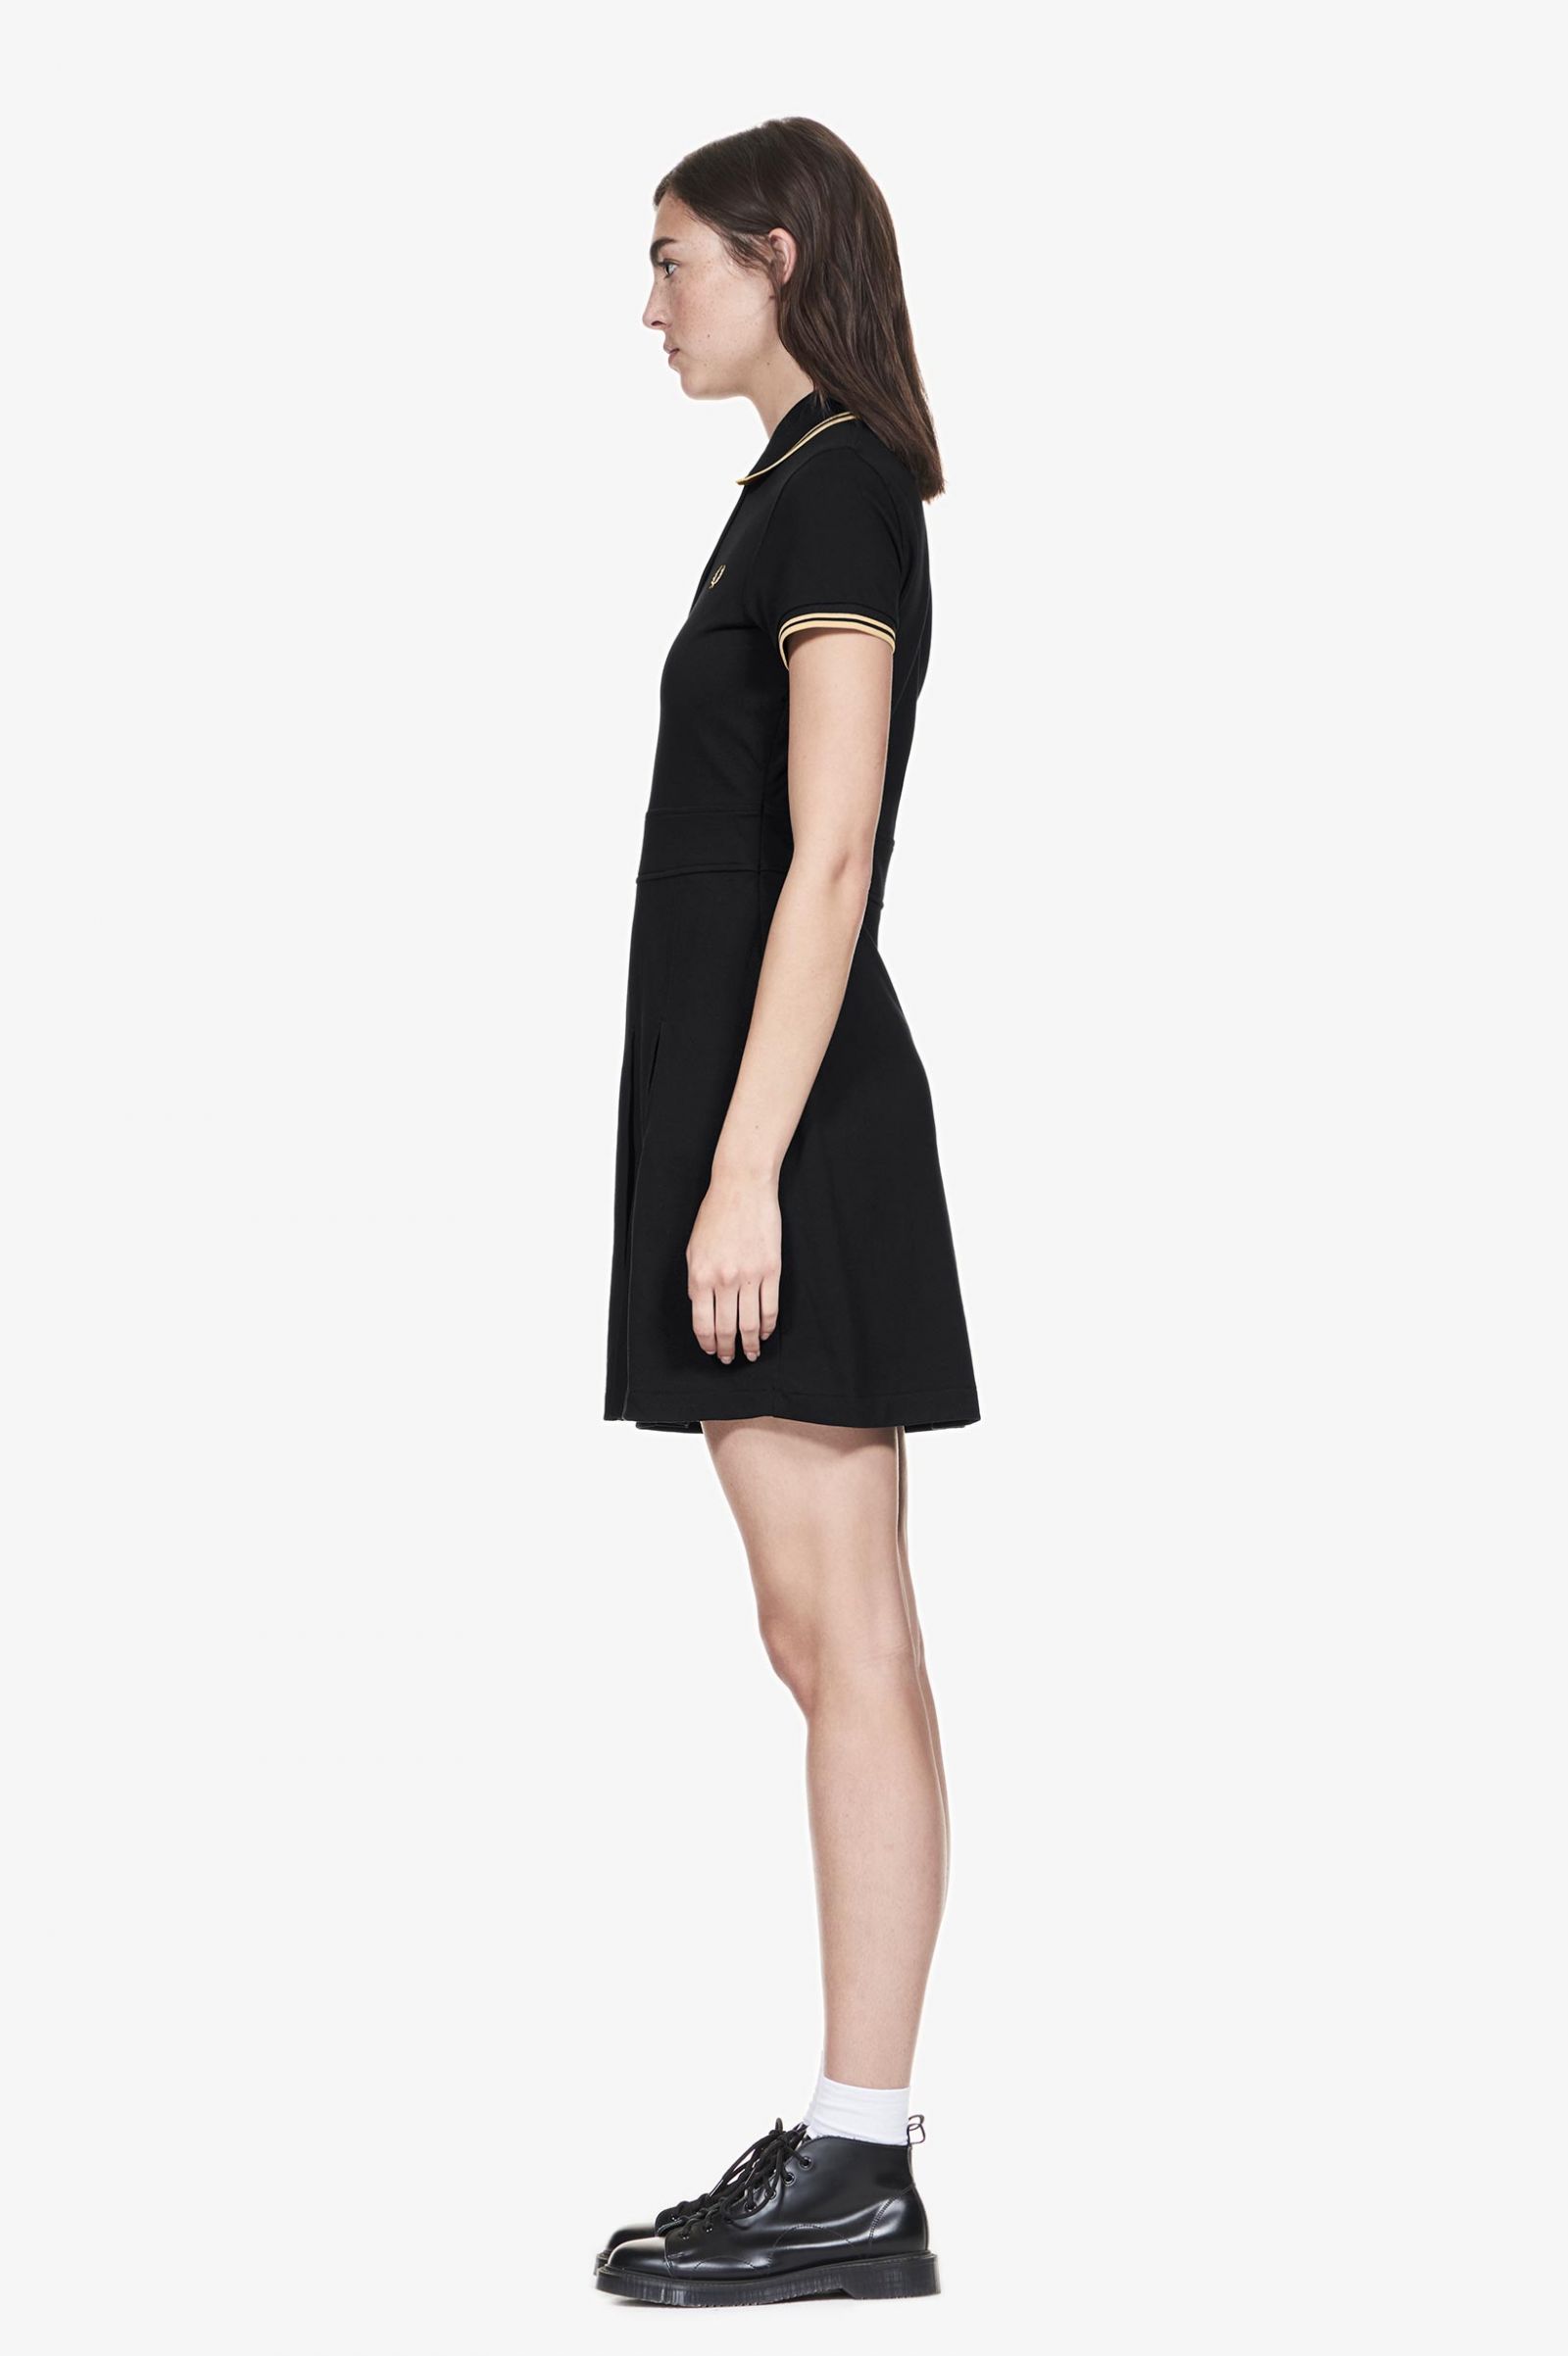 fred perry tennis dress